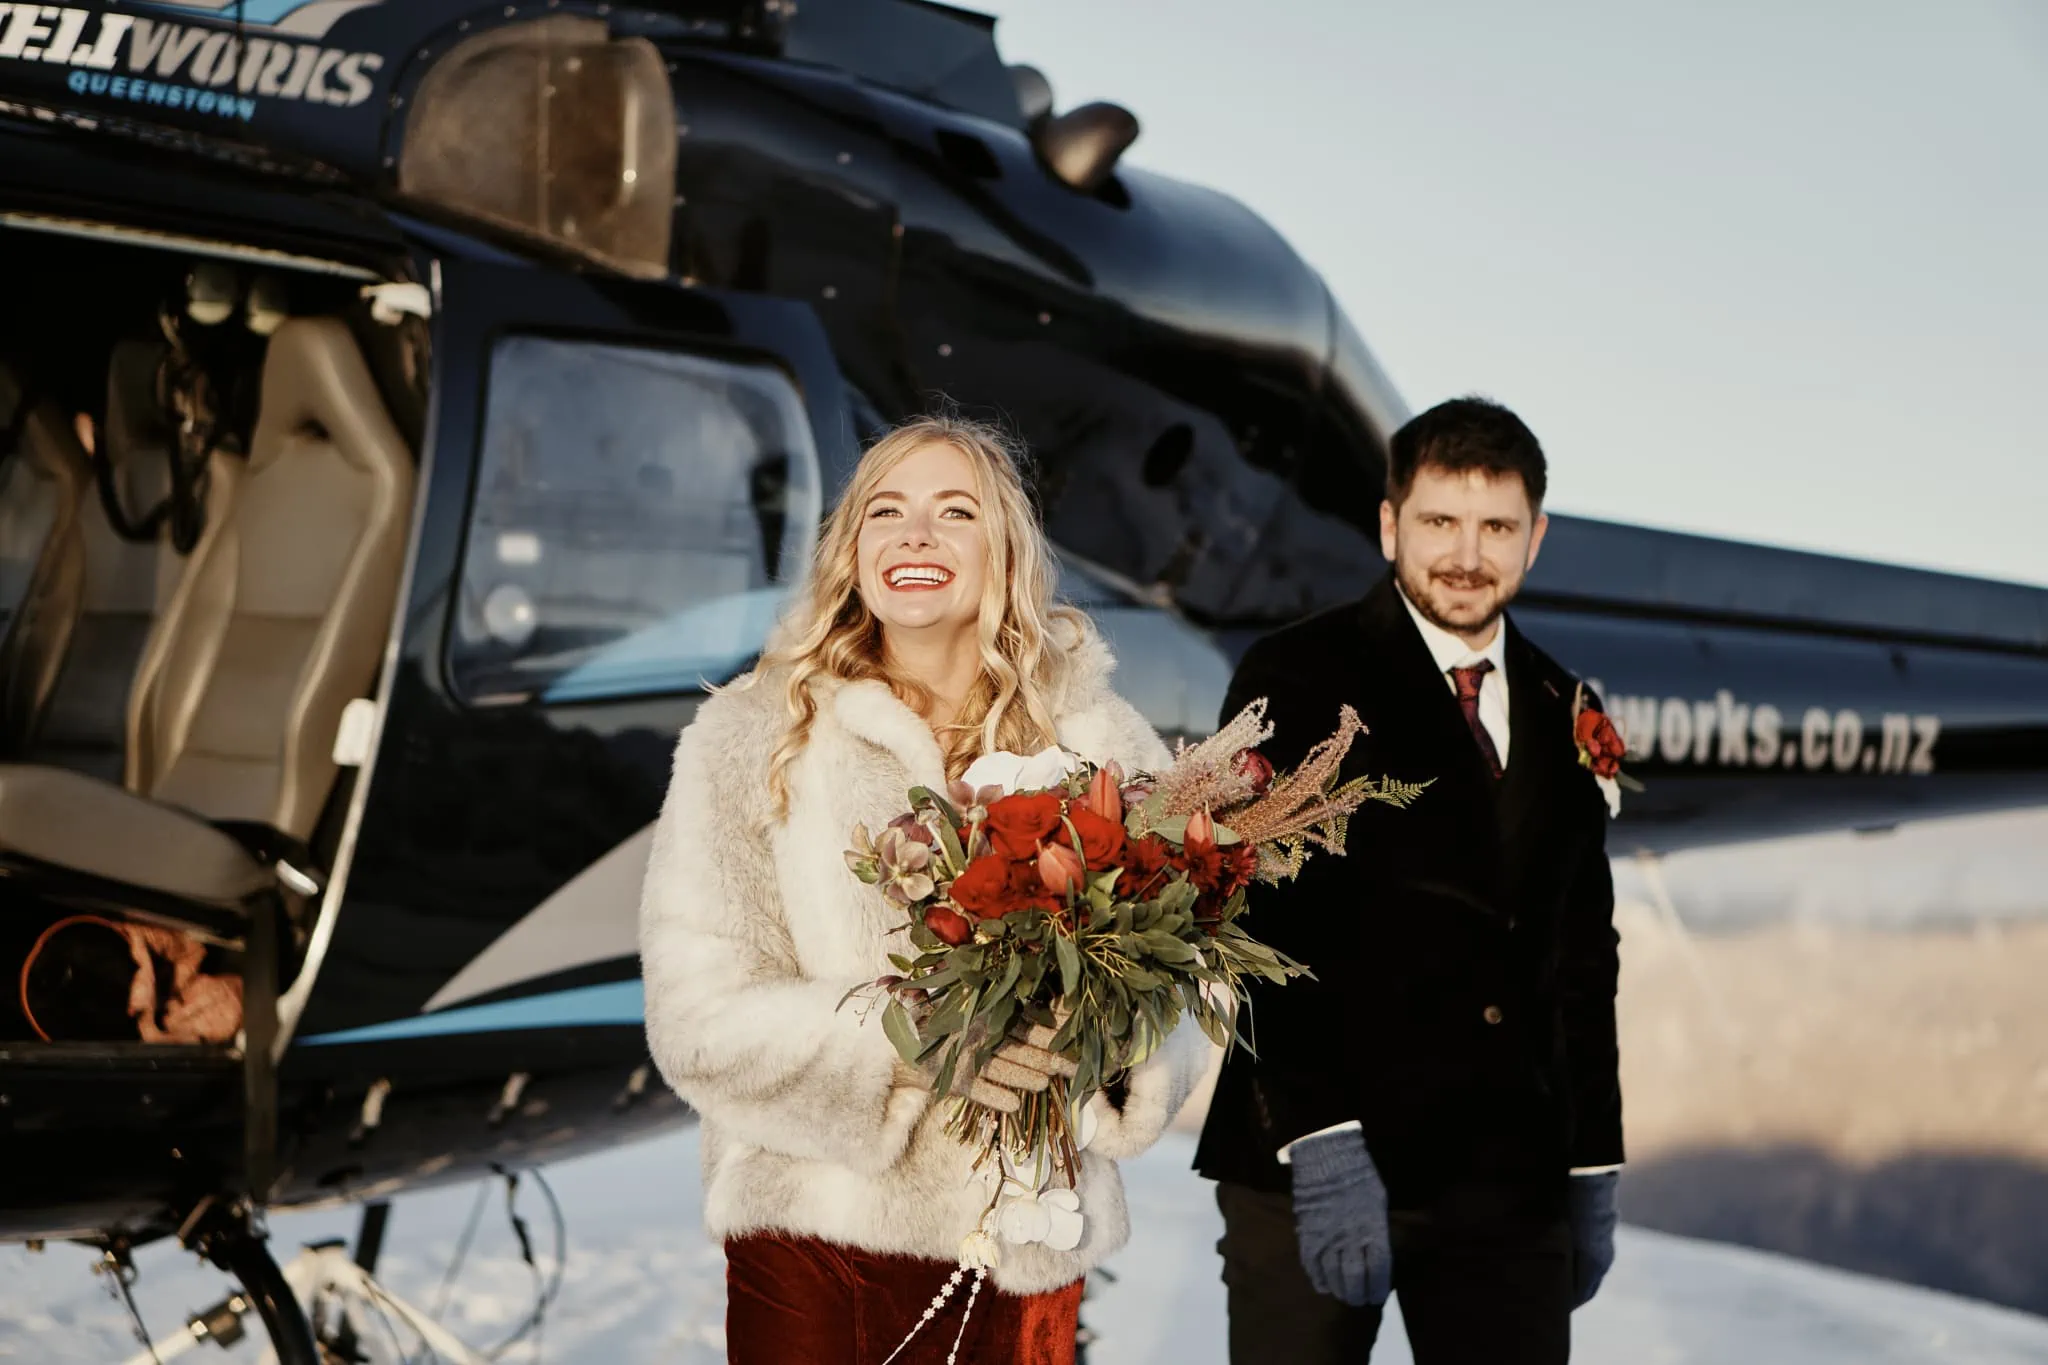 Claire and Rob soaring in an epic heli elopement wedding at Cecil Peak.